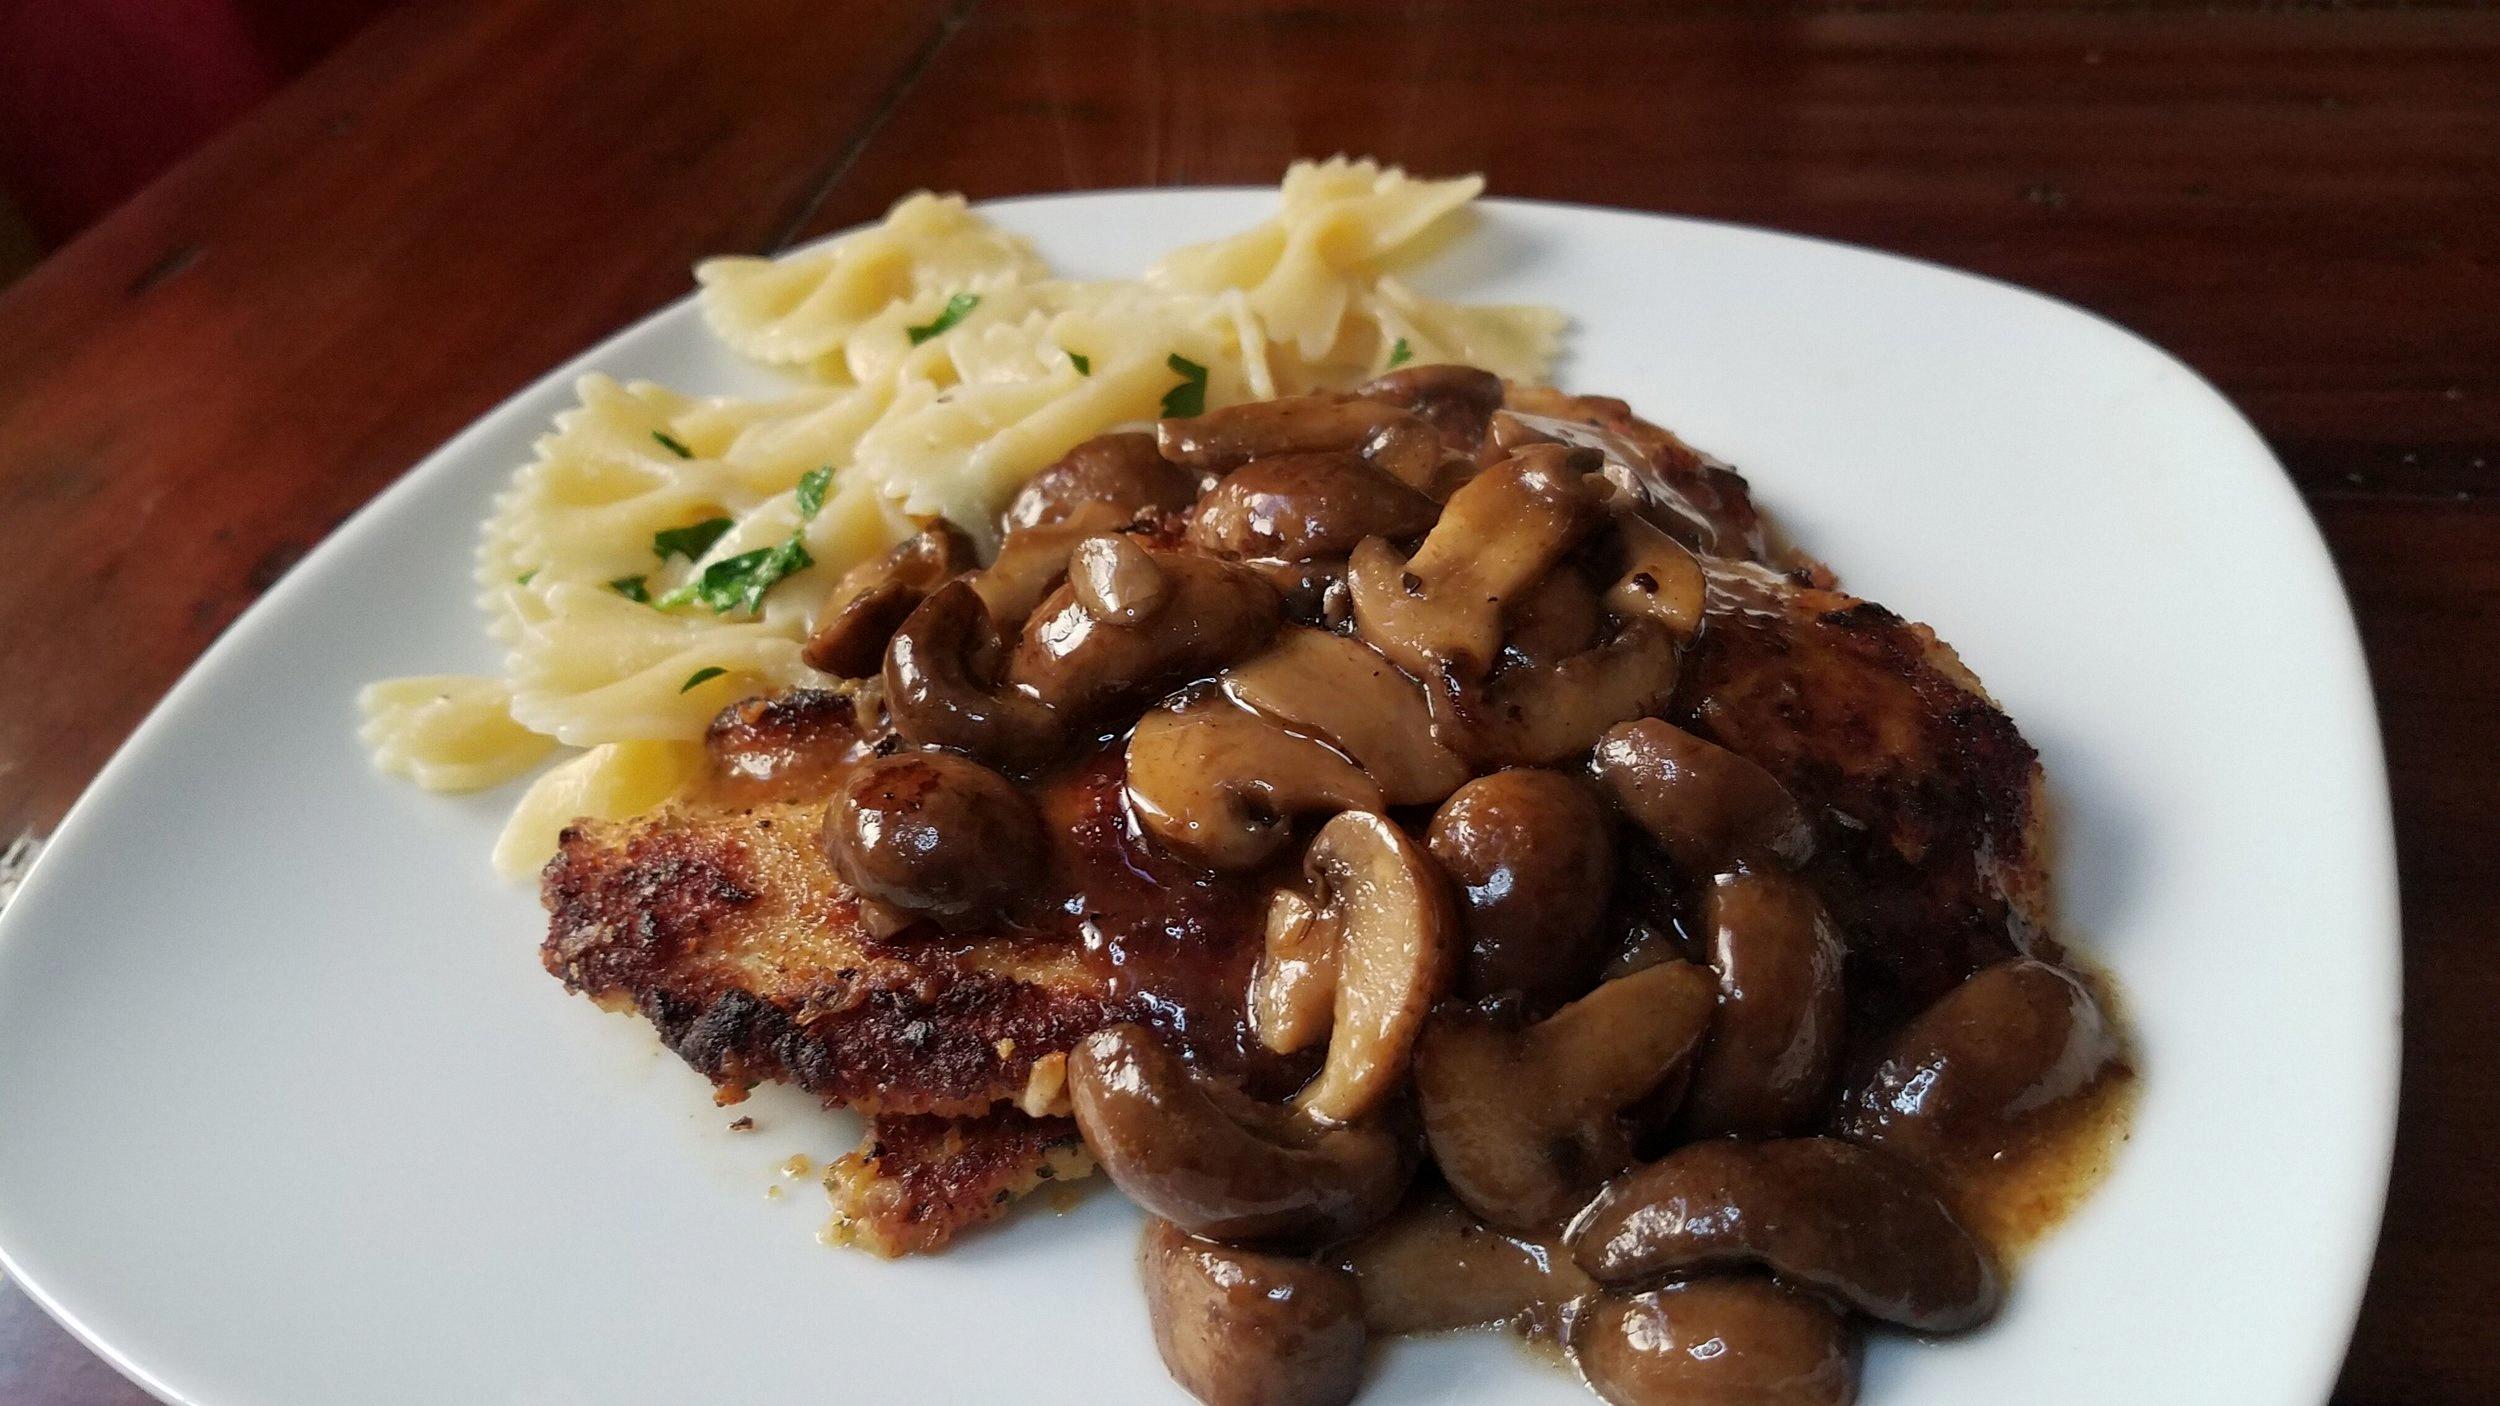 can a pregnant woman eat chicken marsala